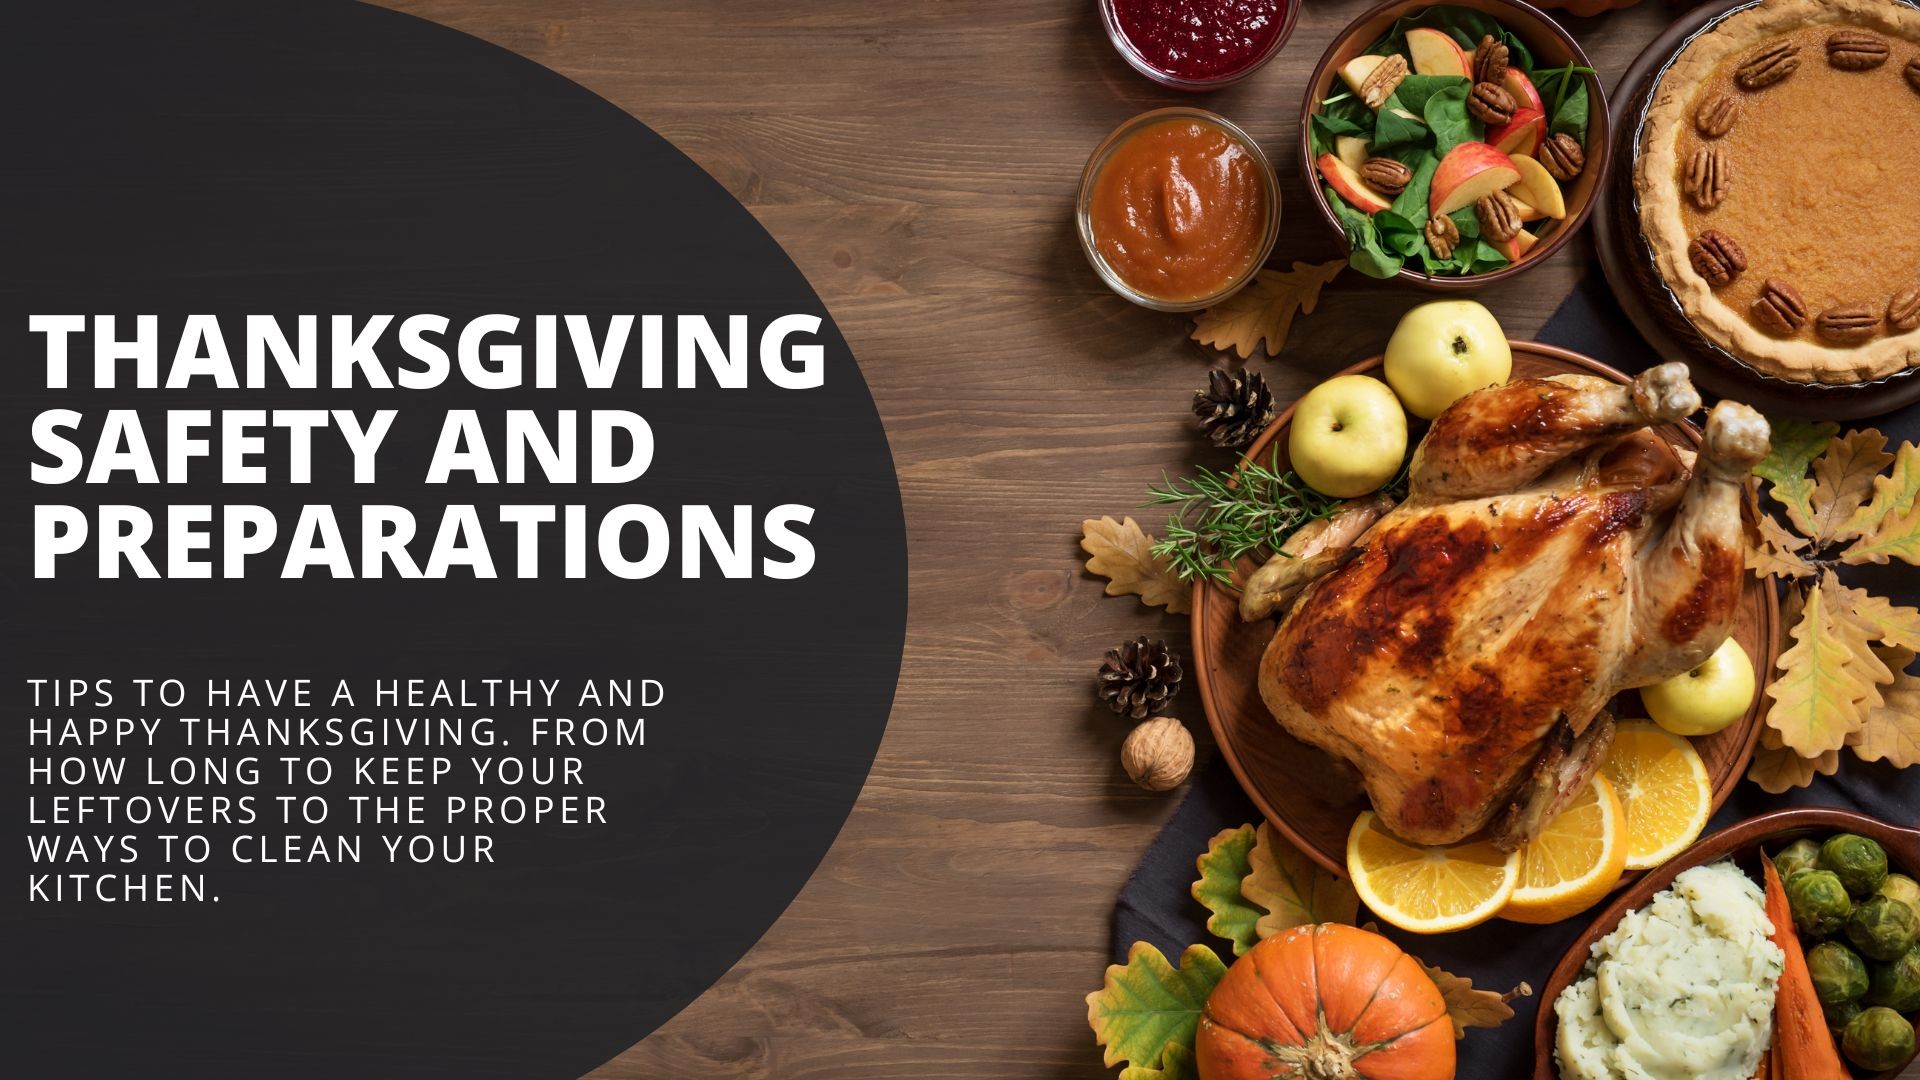 Tips to have a healthy and happy Thanksgiving. From how long to keep your leftovers to the proper ways to clean your kitchen.